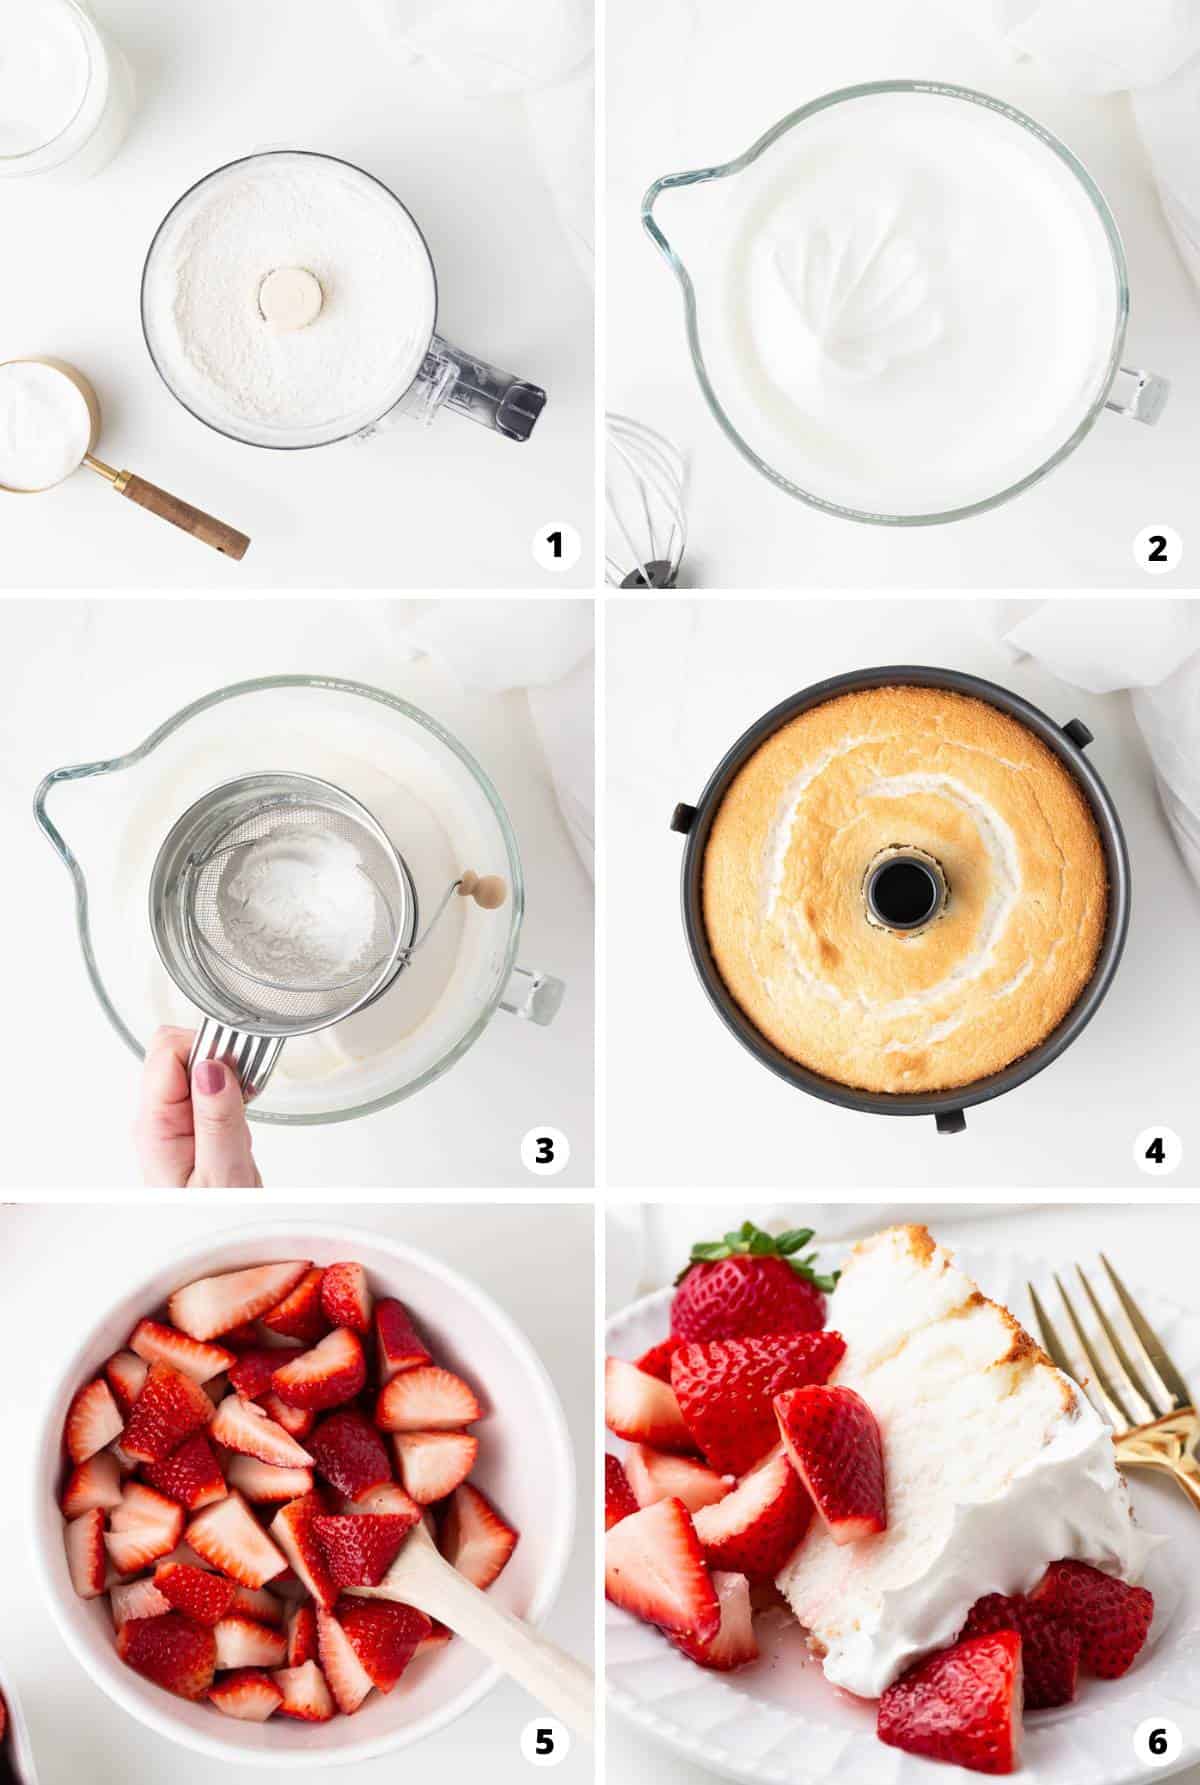 Showing how to make strawberry shortcake in a 6 step collage. 